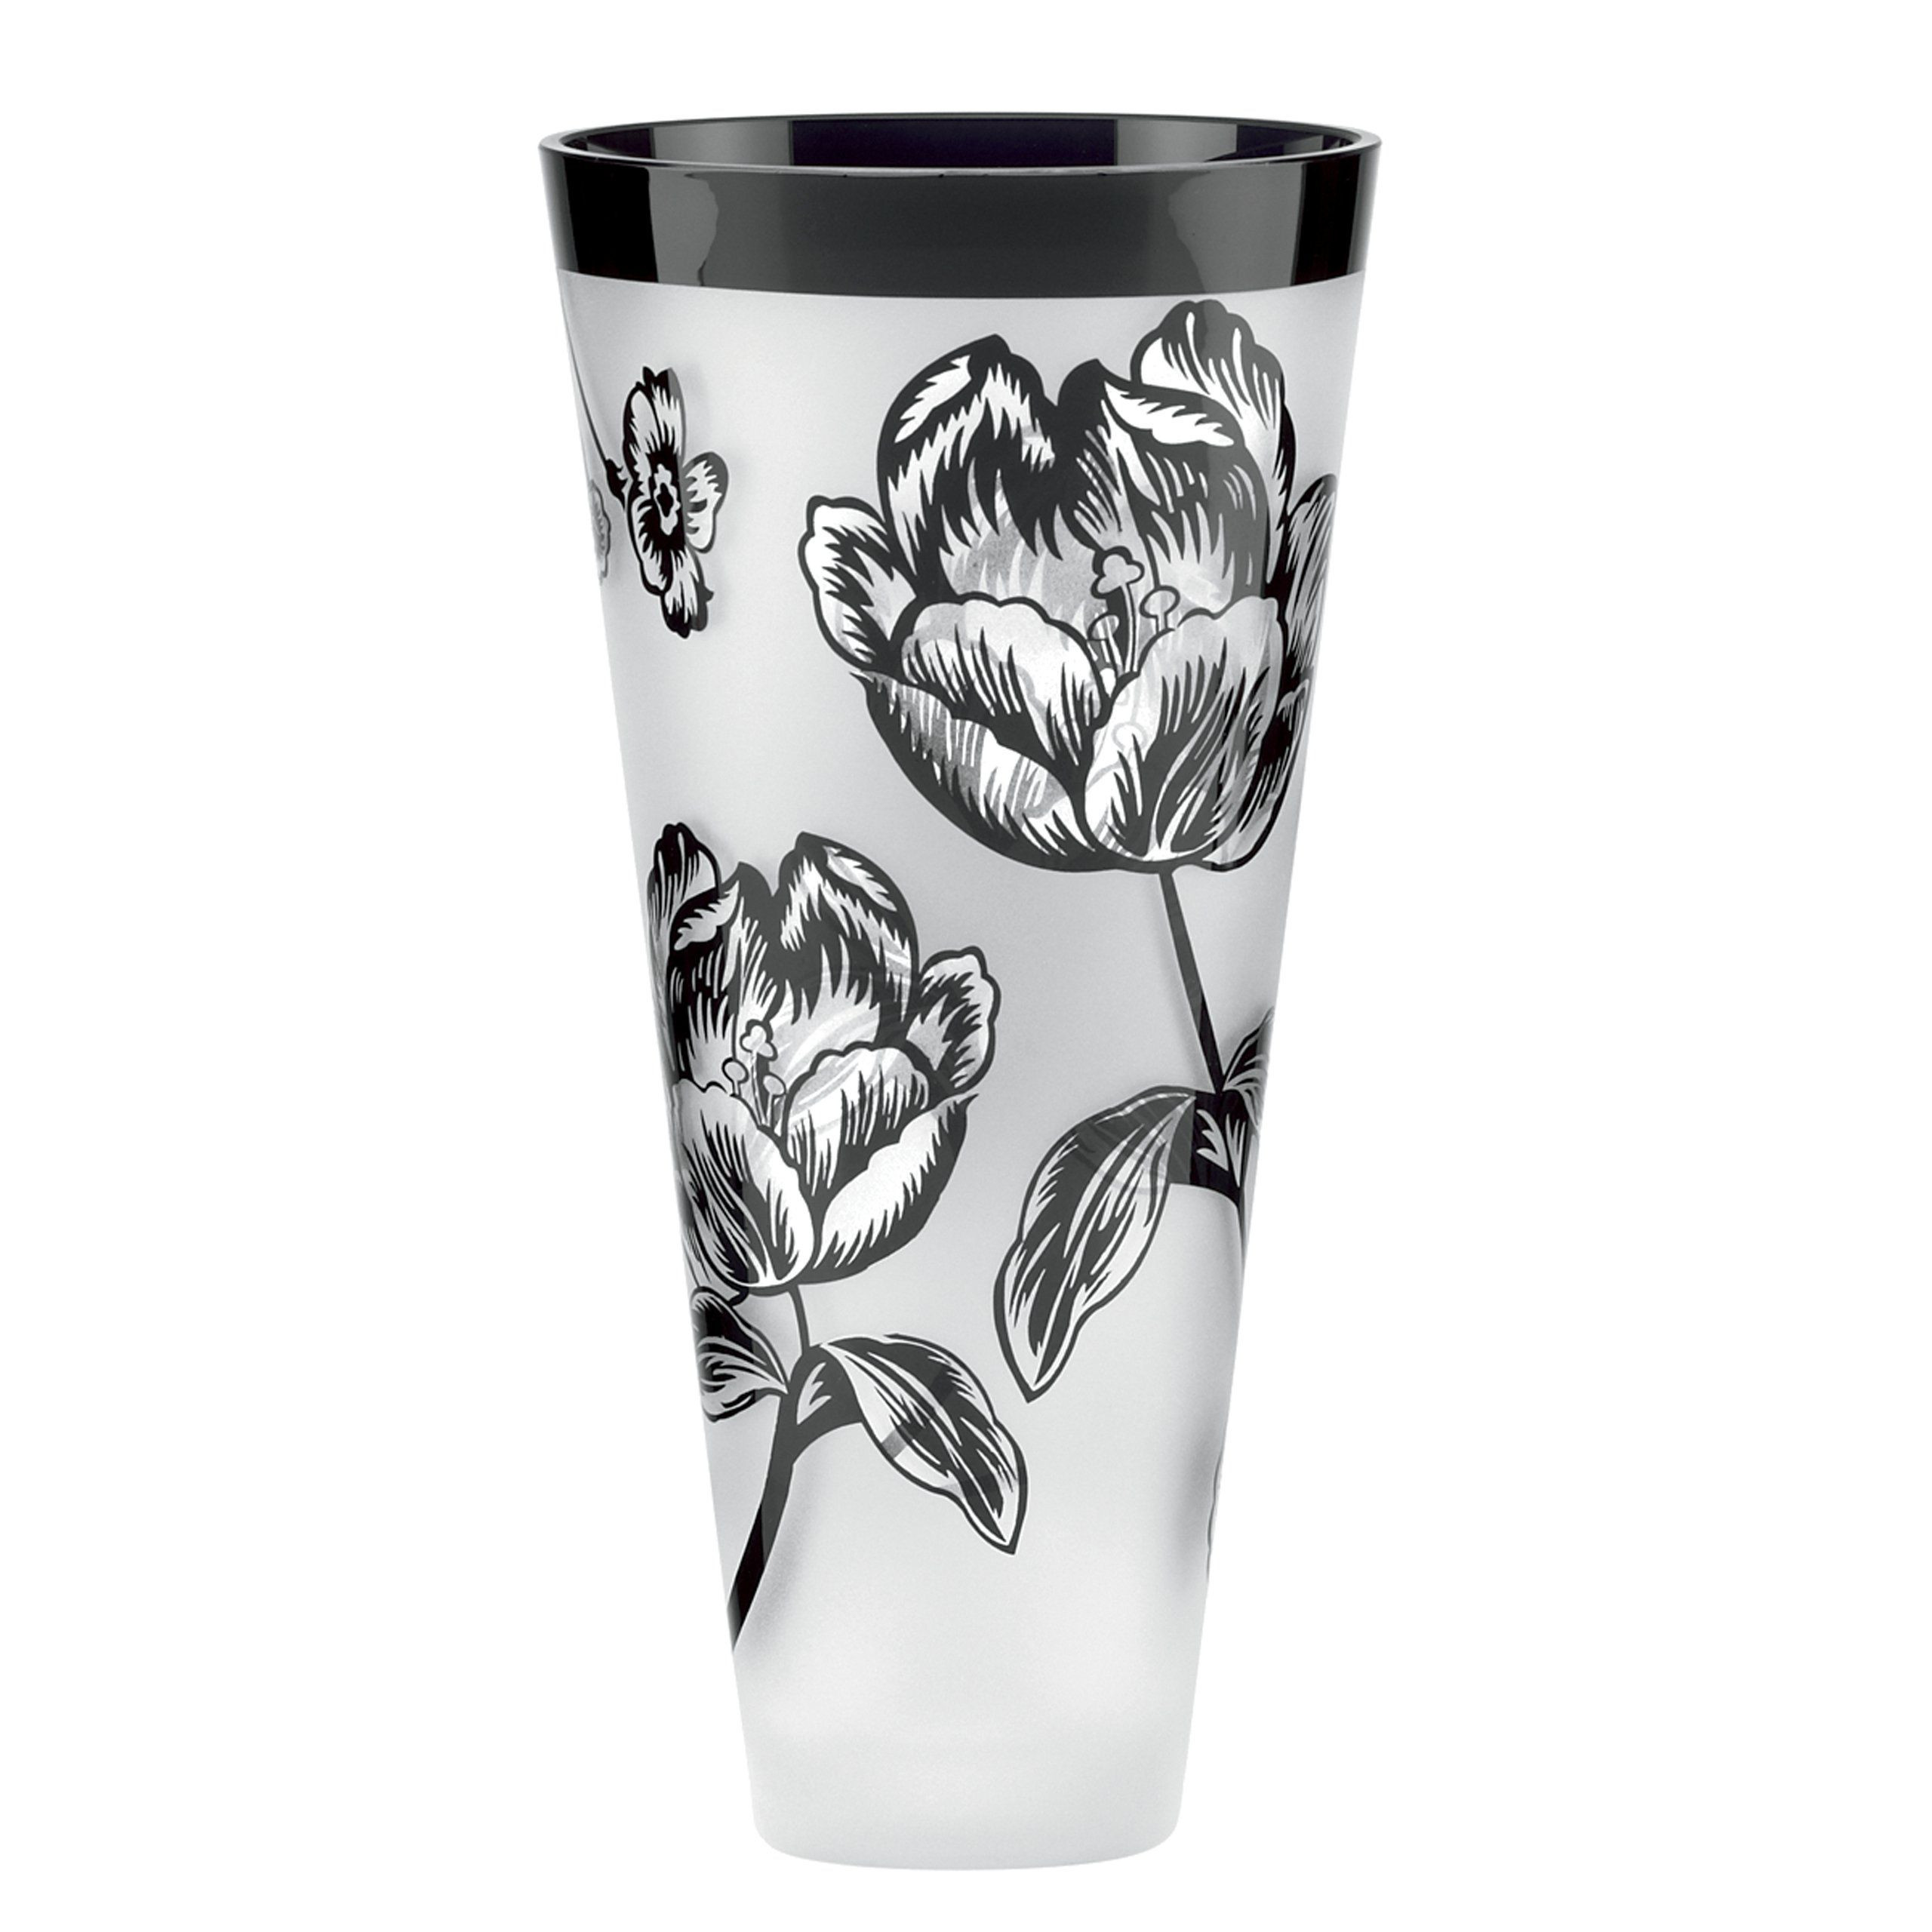 21 attractive Mikasa Blossom Vase 2024 free download mikasa blossom vase of lenox midnight blossom bud vase 8 inch crafted of non lead crystal pertaining to lenox midnight blossom bud vase 8 inch crafted of non lead crystal